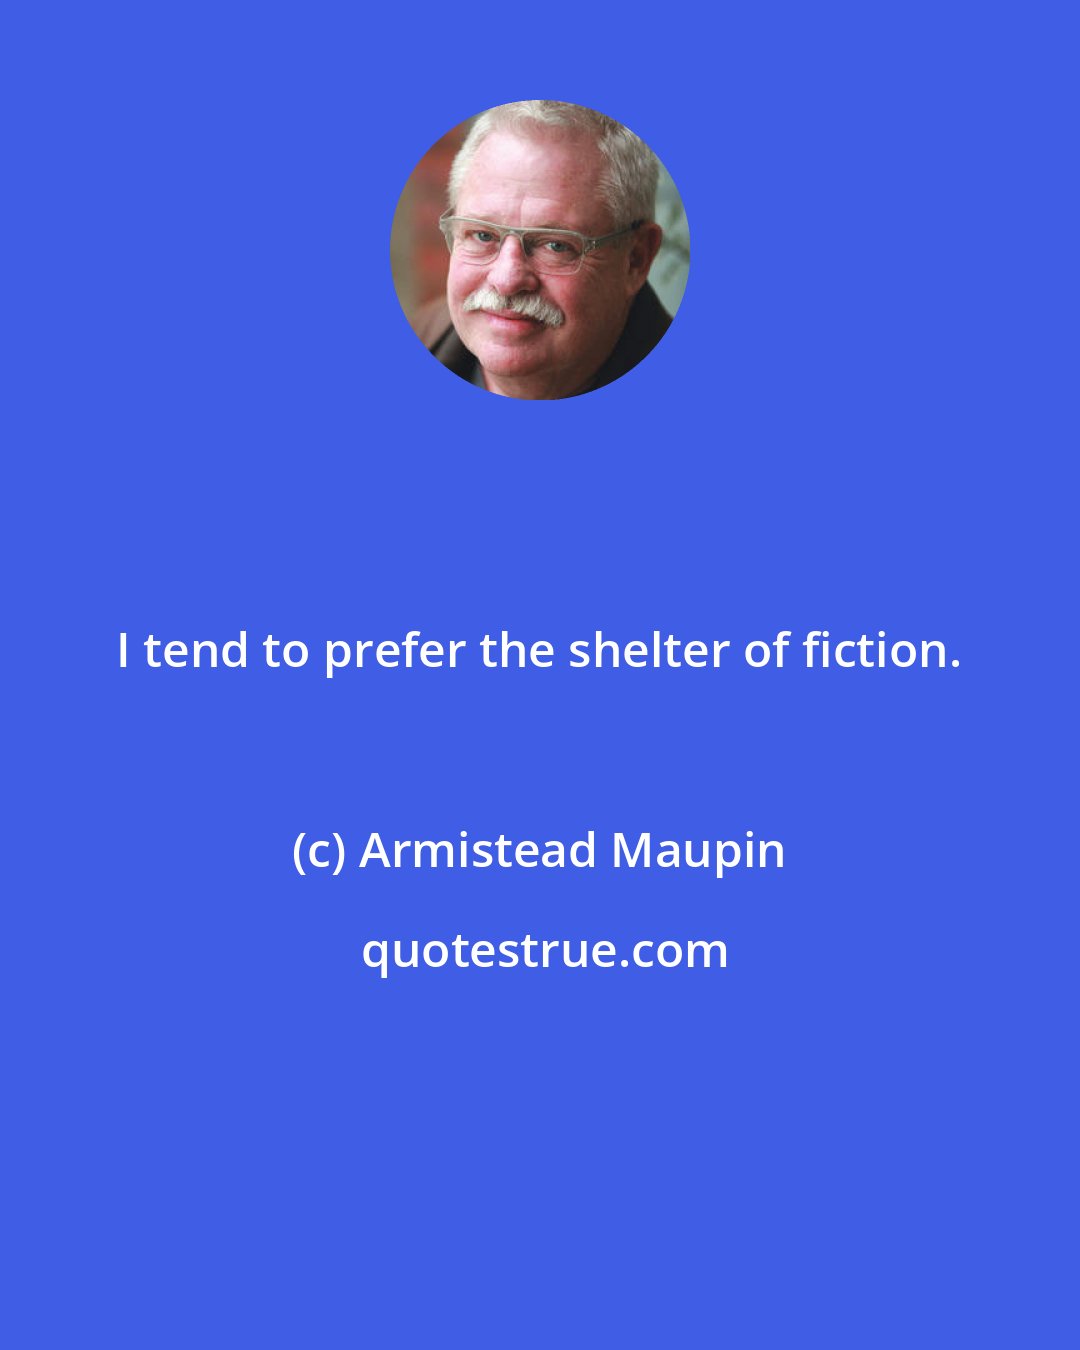 Armistead Maupin: I tend to prefer the shelter of fiction.